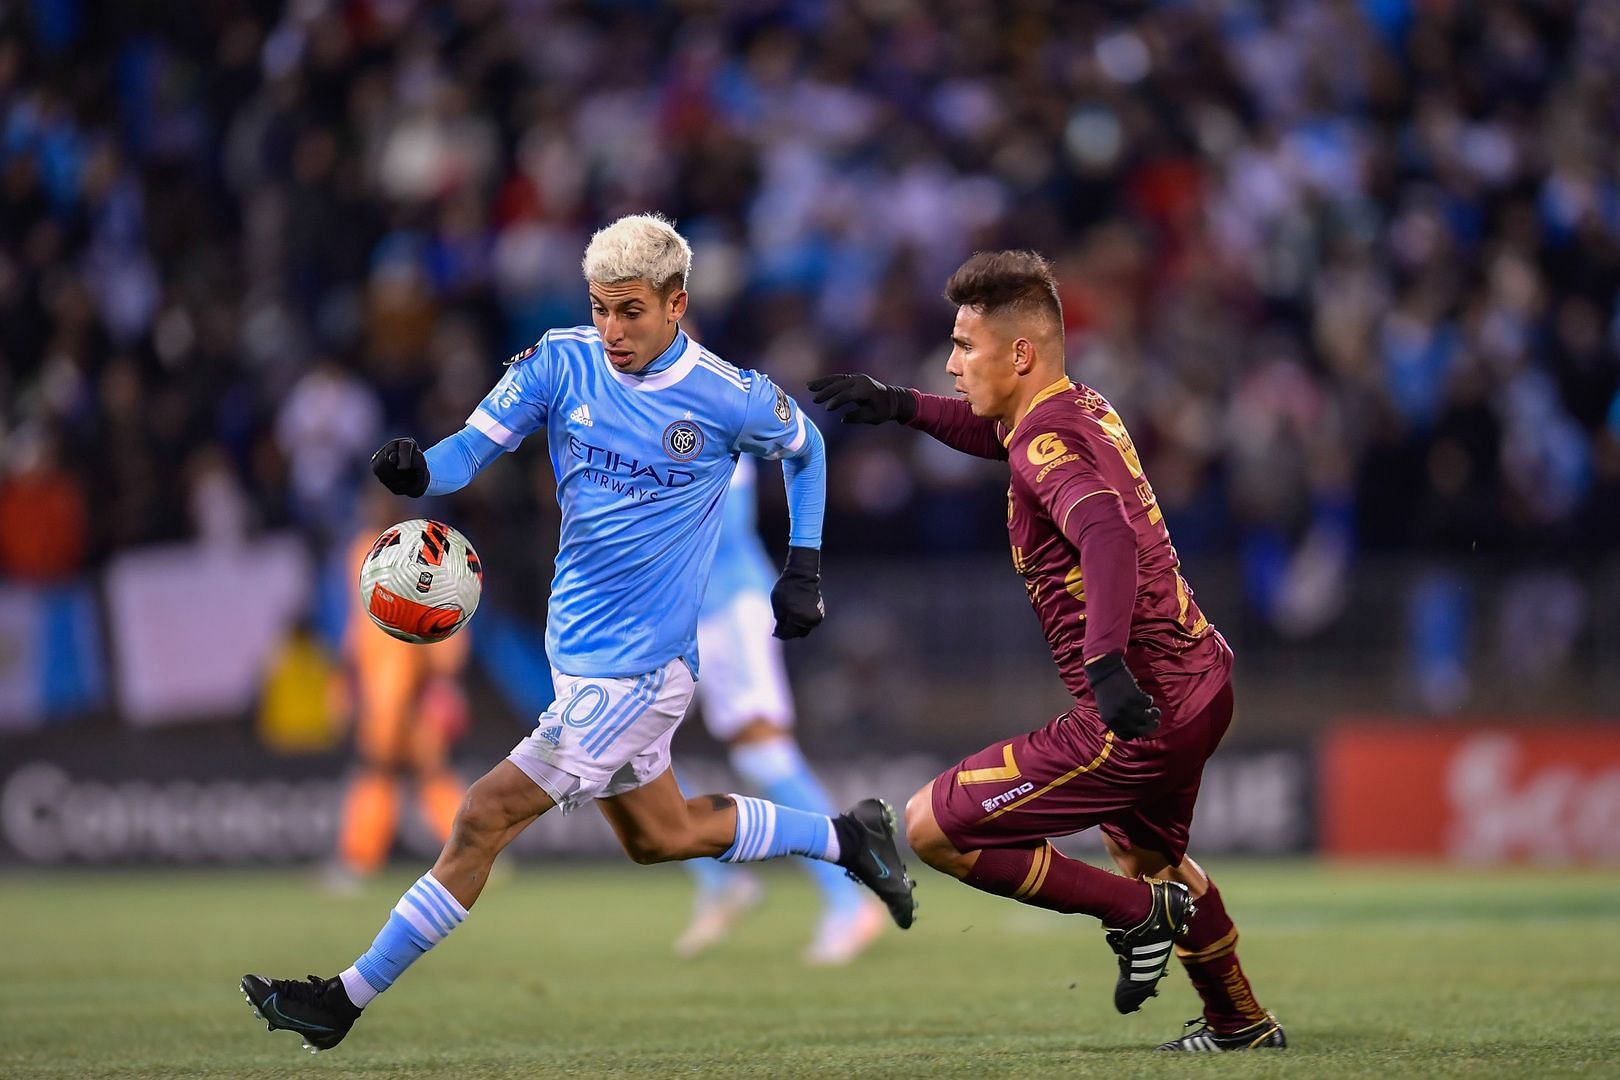 New York City FC face Comunicaciones in their CONCACAF Champions League fixture on Tuesday